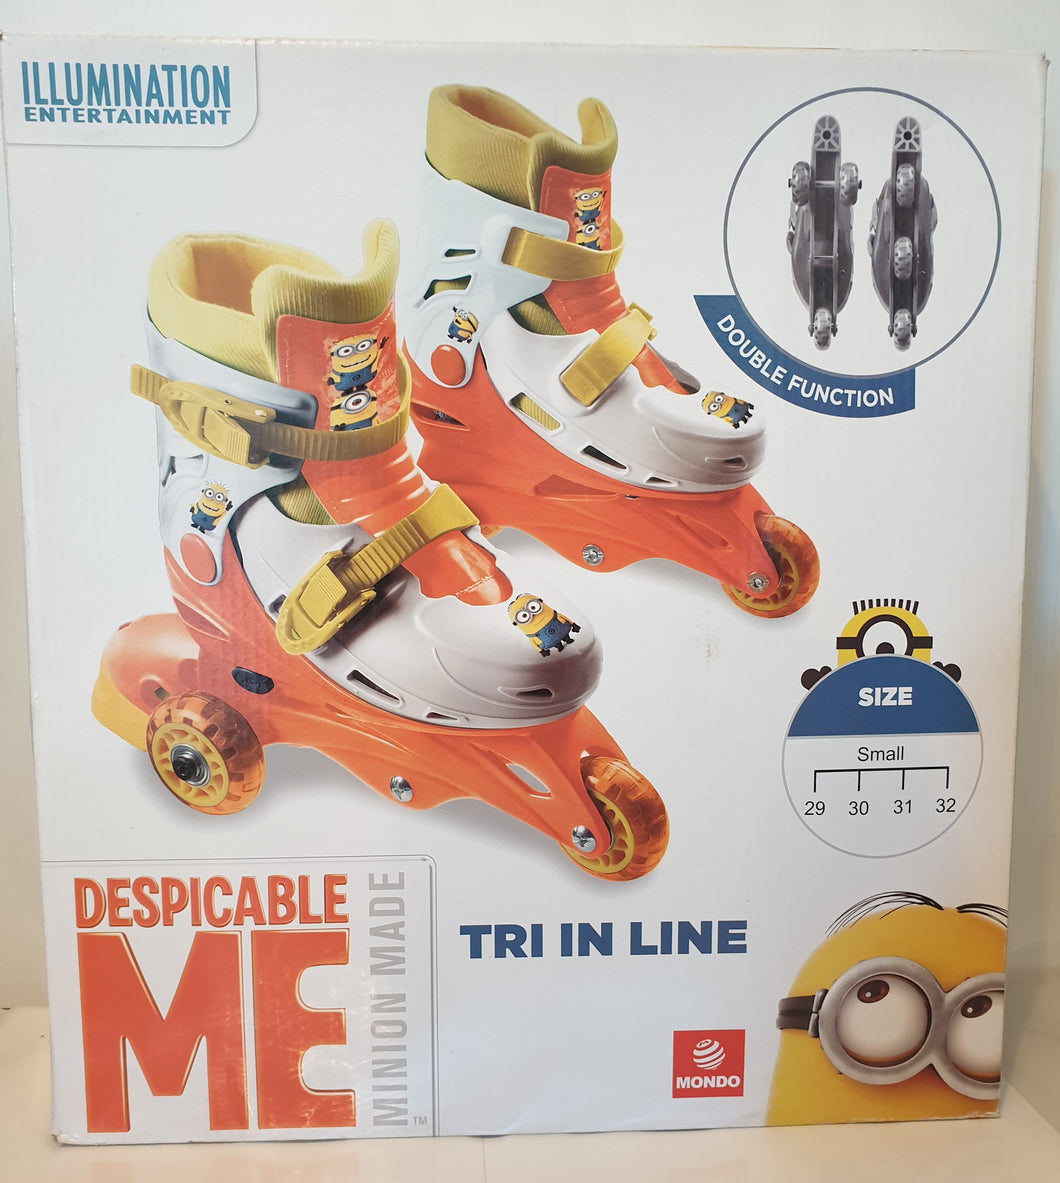 Despicable Me Tri In Lone Roller blades